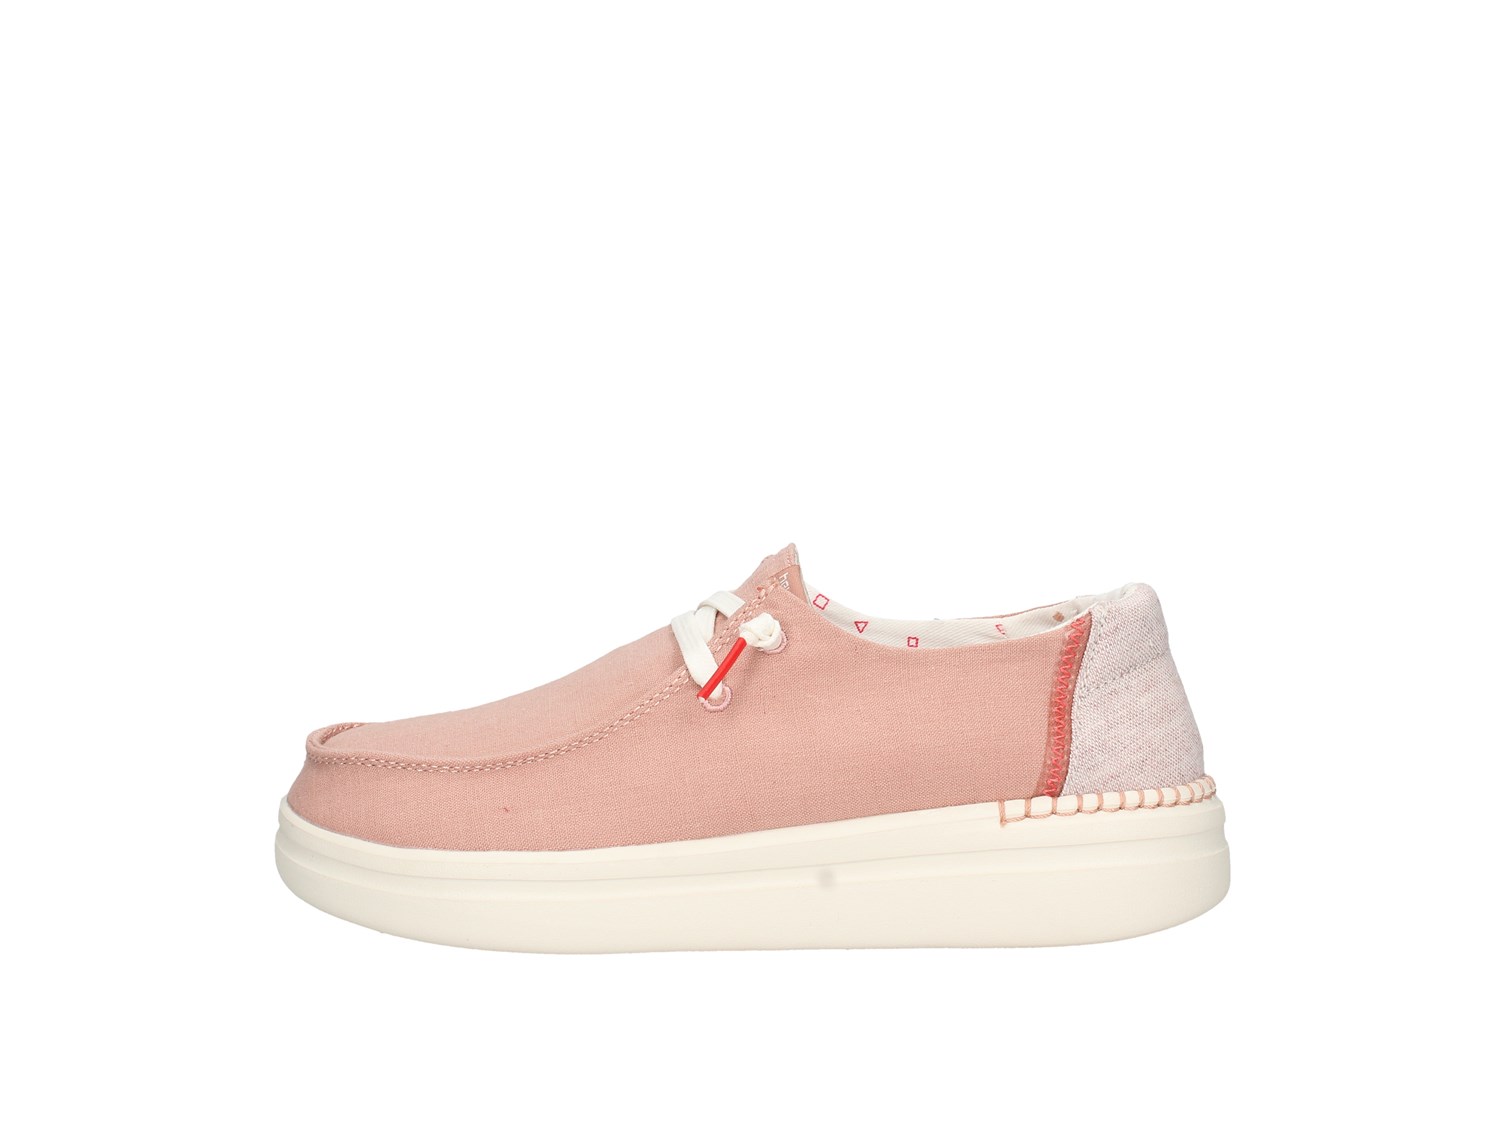 Hey Dude Wendy Rise Pink Shoes Women Moccasin